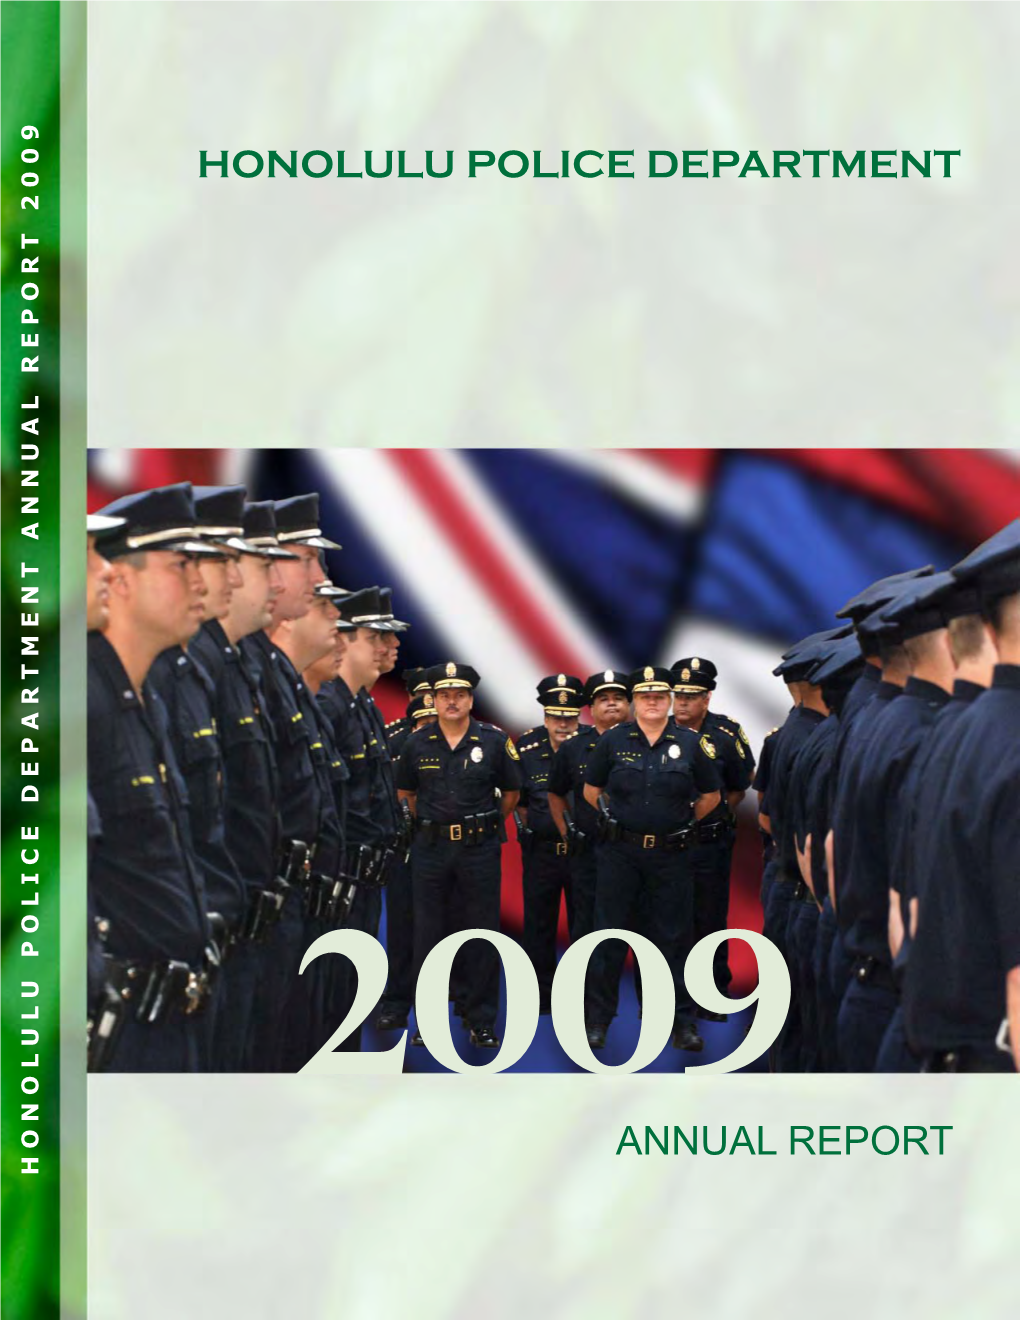 The 2009 Annual Report